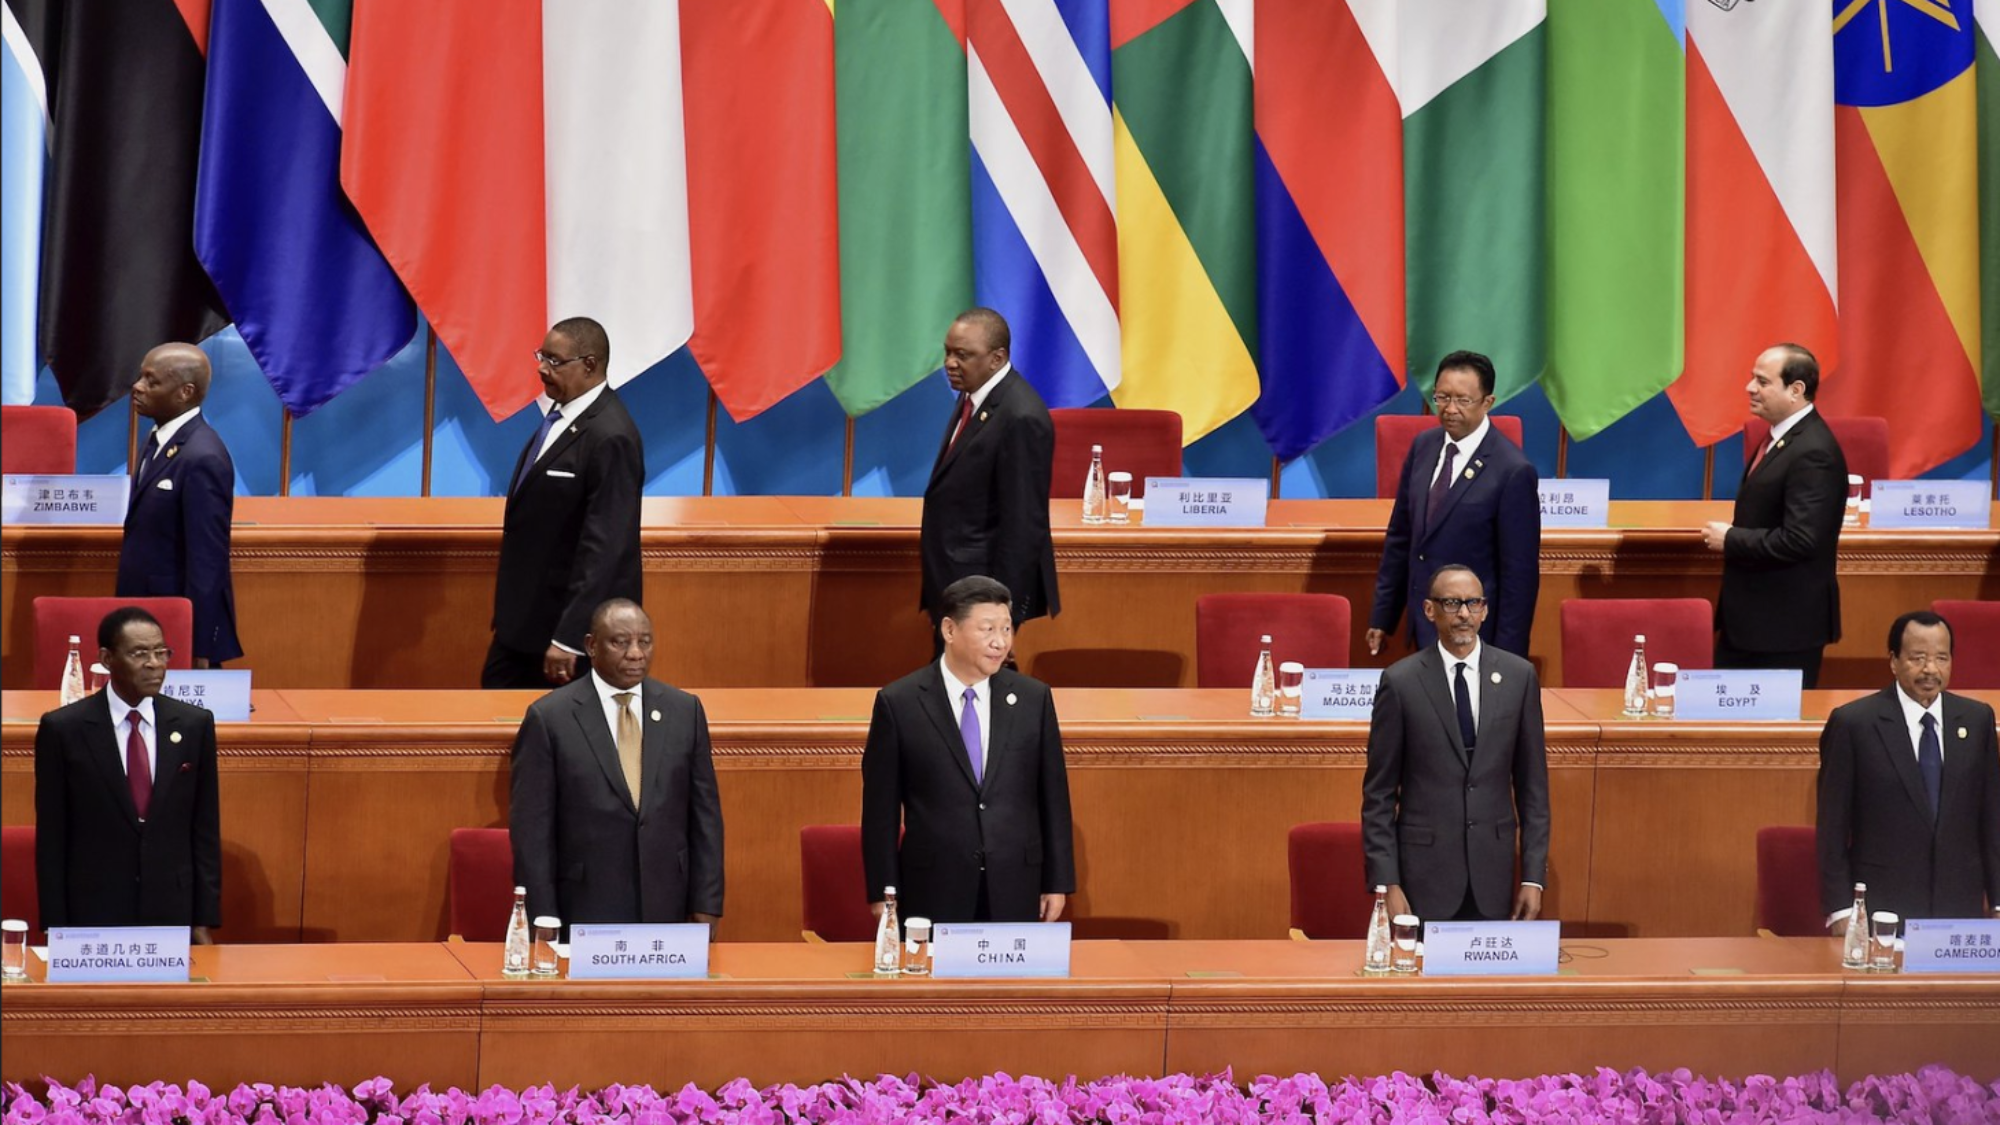 Xi Jinping and African country leaders stand behind rows of chairs, with country flags in the background.